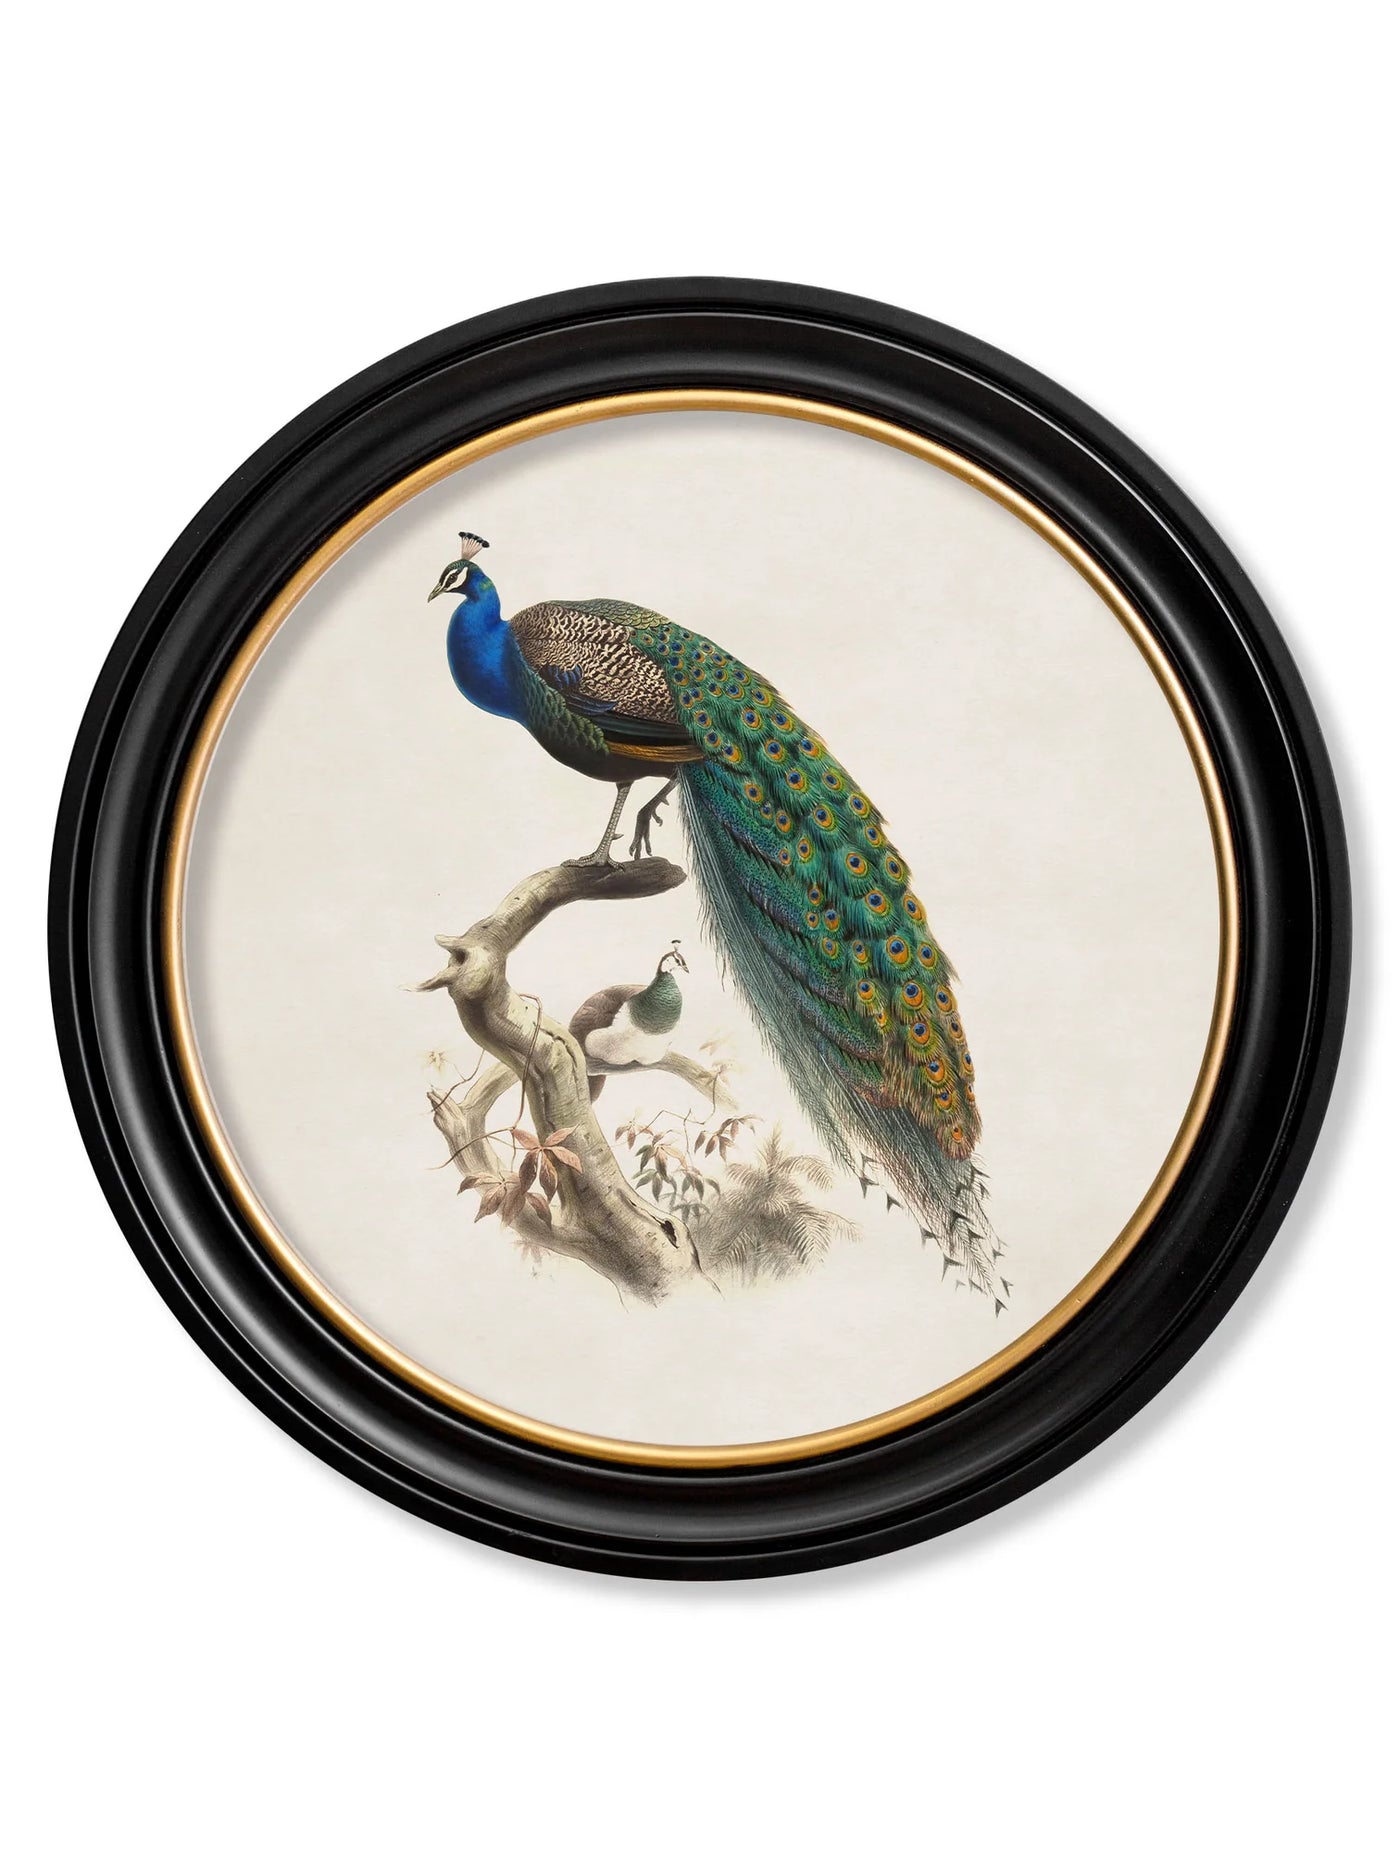 C.1800s PEACOCK - ROUND FRAME - TheArtistsQuarter